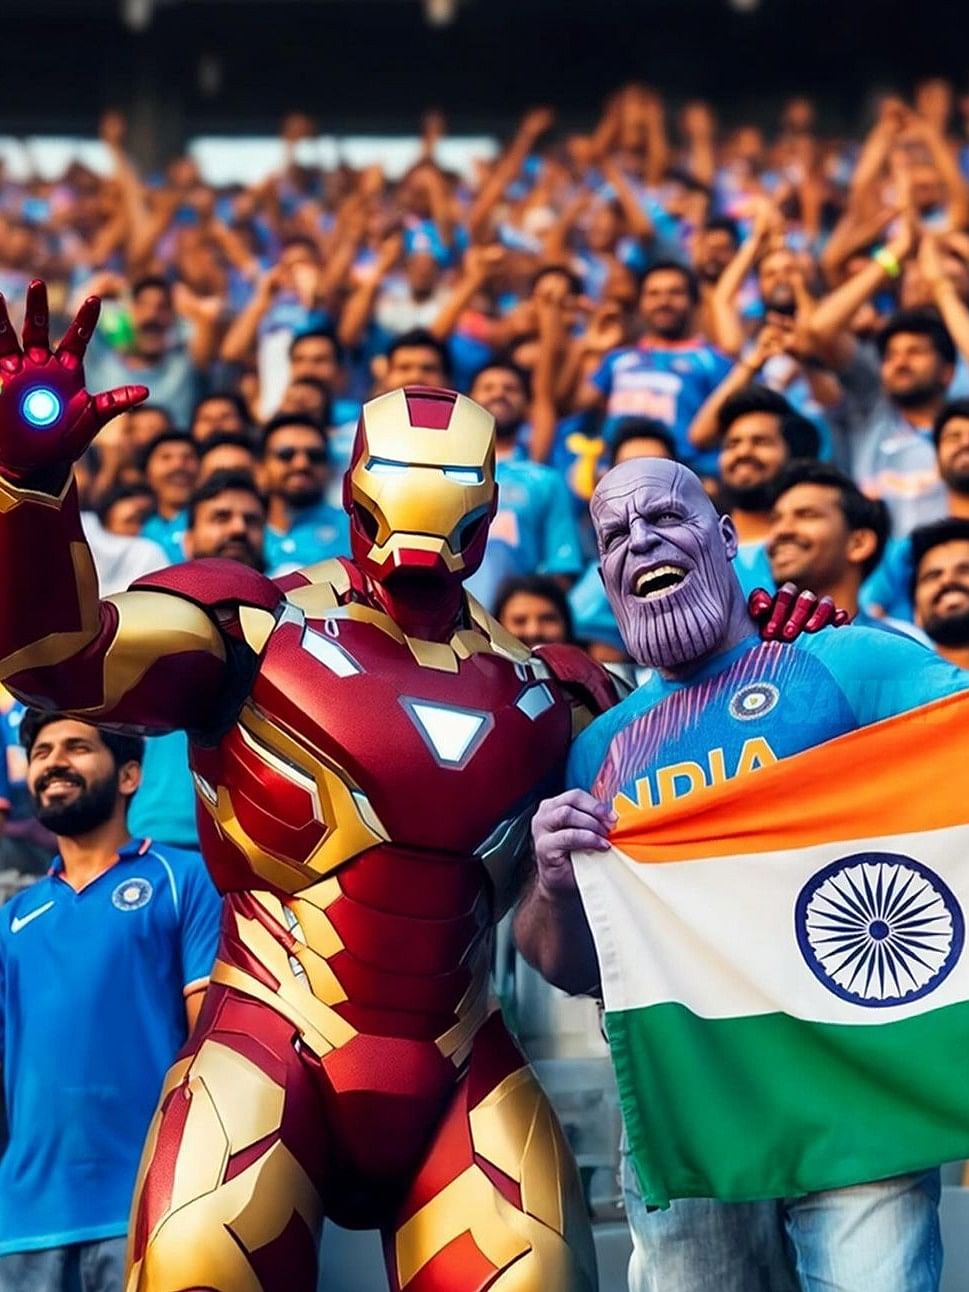 Not just politicians and celebrities, even the artists reimagined superheroes. In this photo, Iron Man is seen with Thanos.